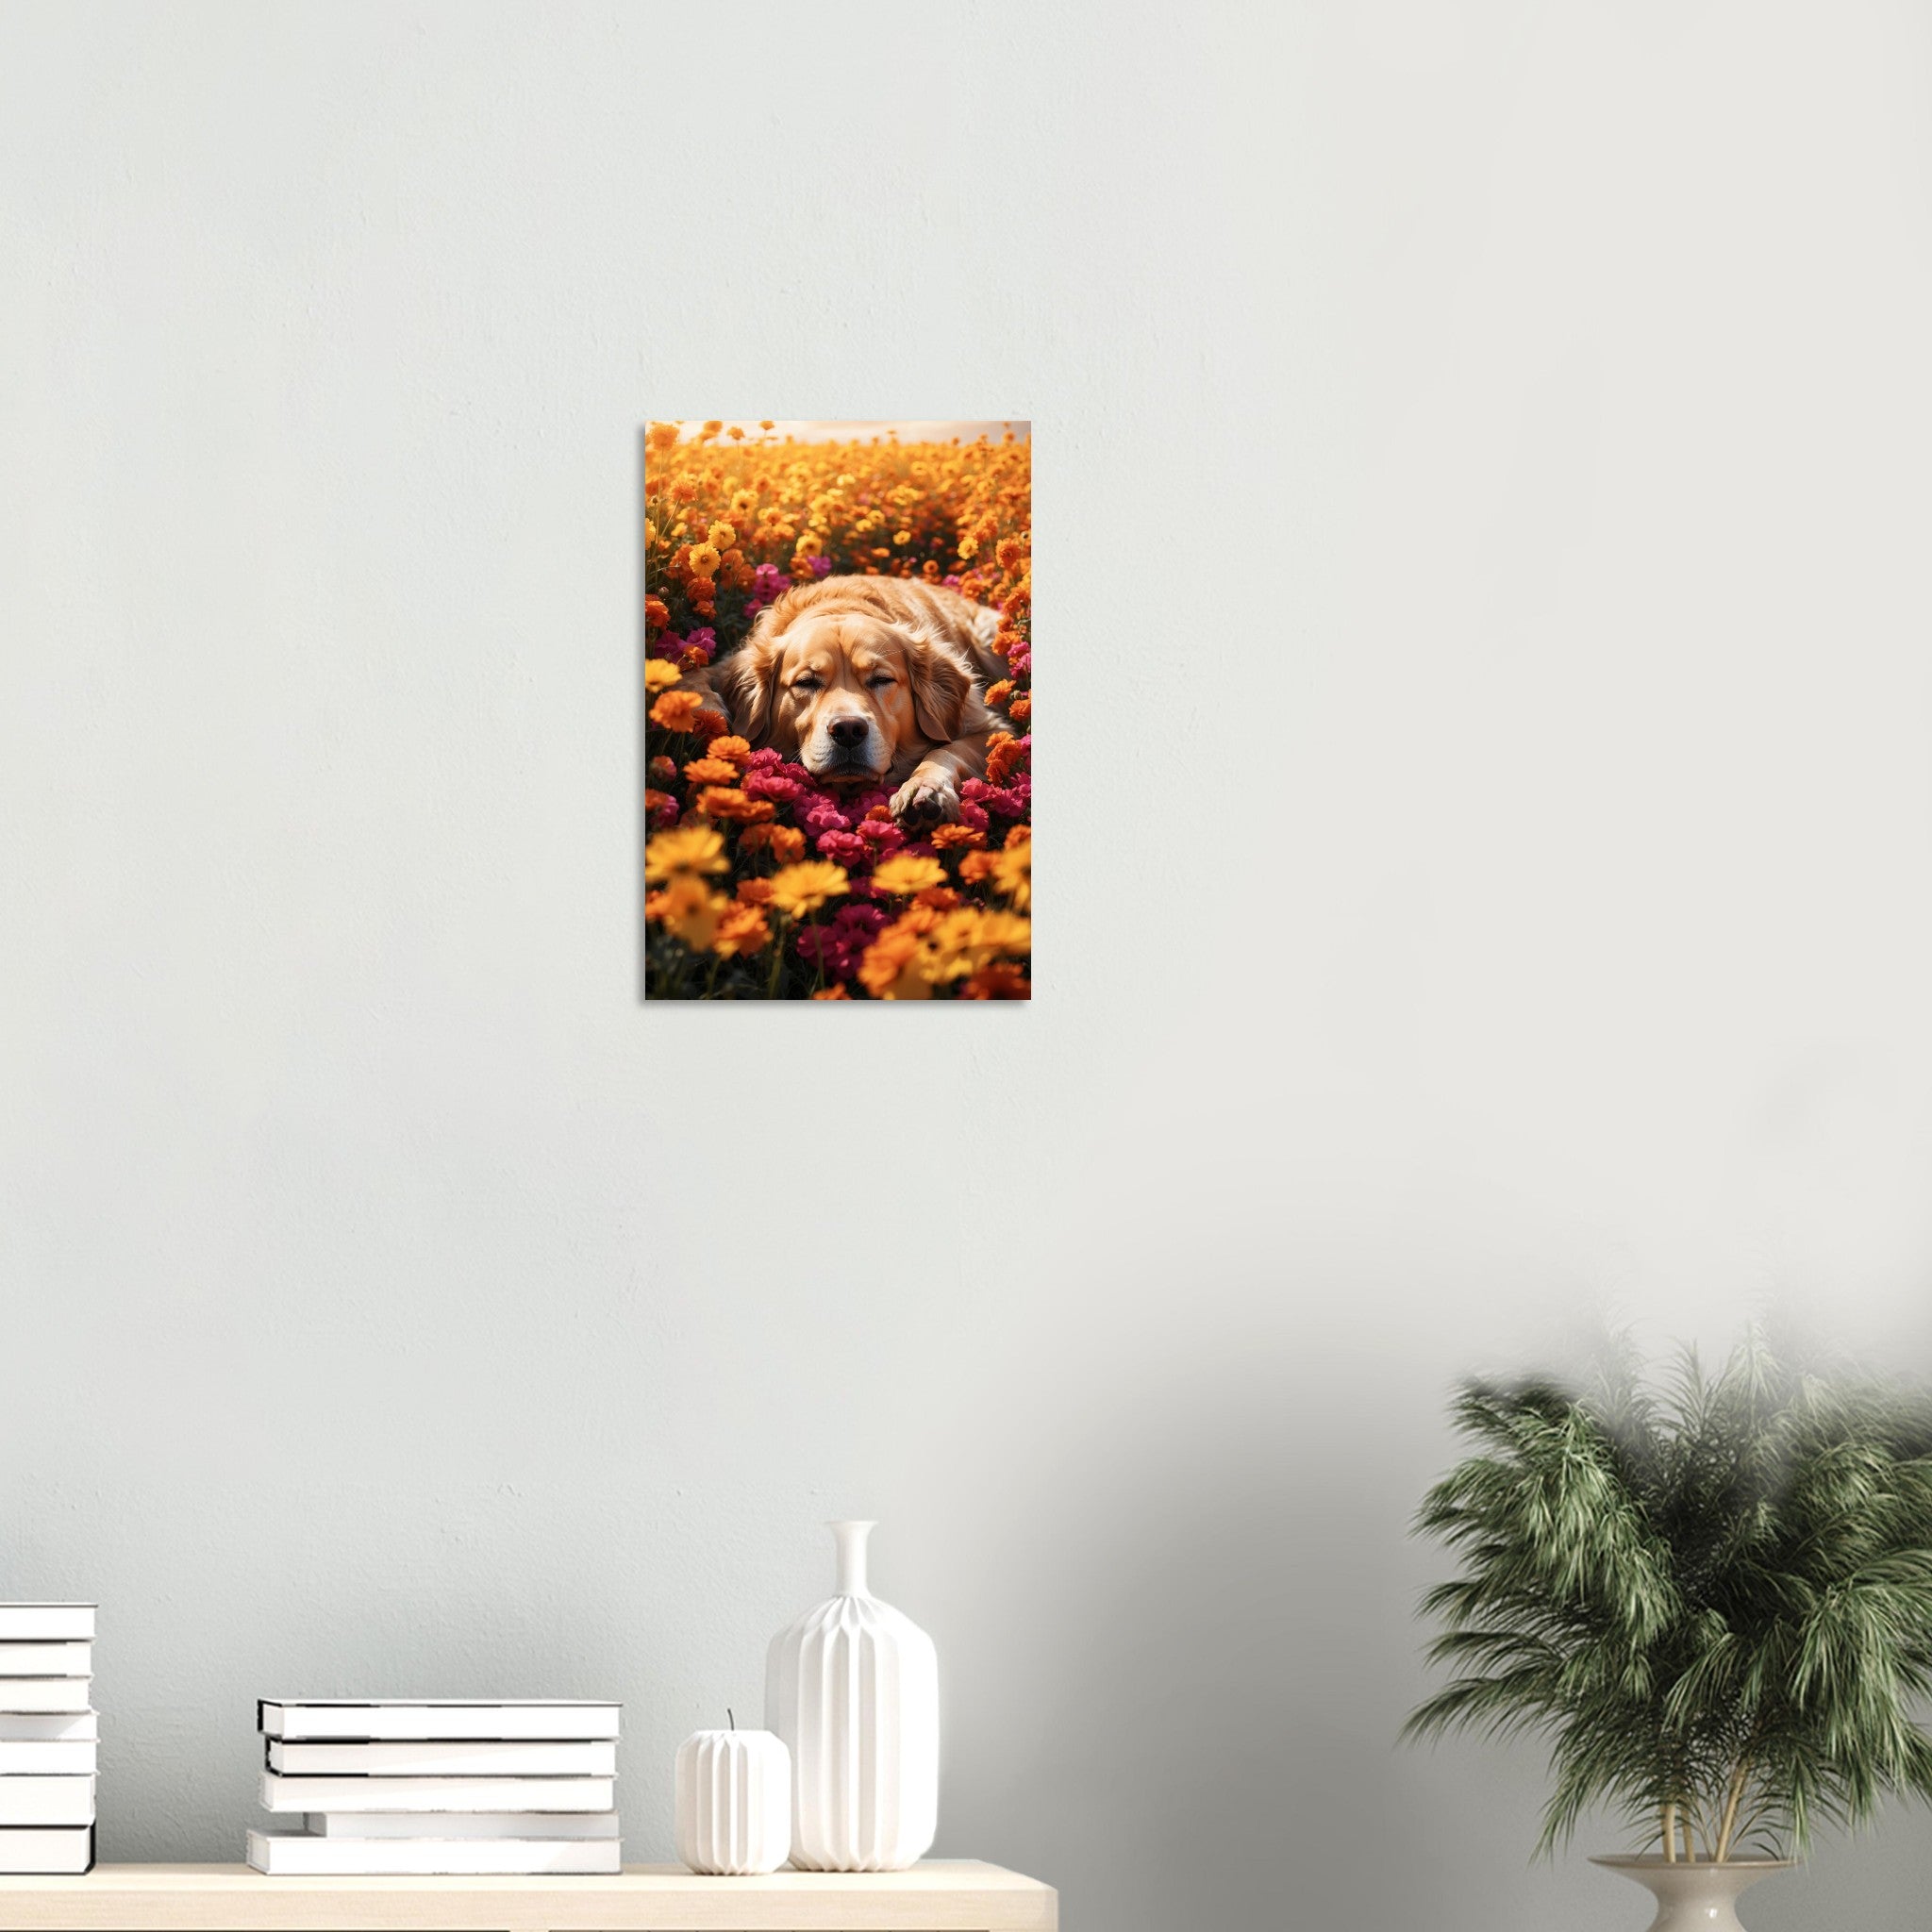 "A moment's peace" Metal Poster Print Design by the online-based home interior company, Radiartvector.